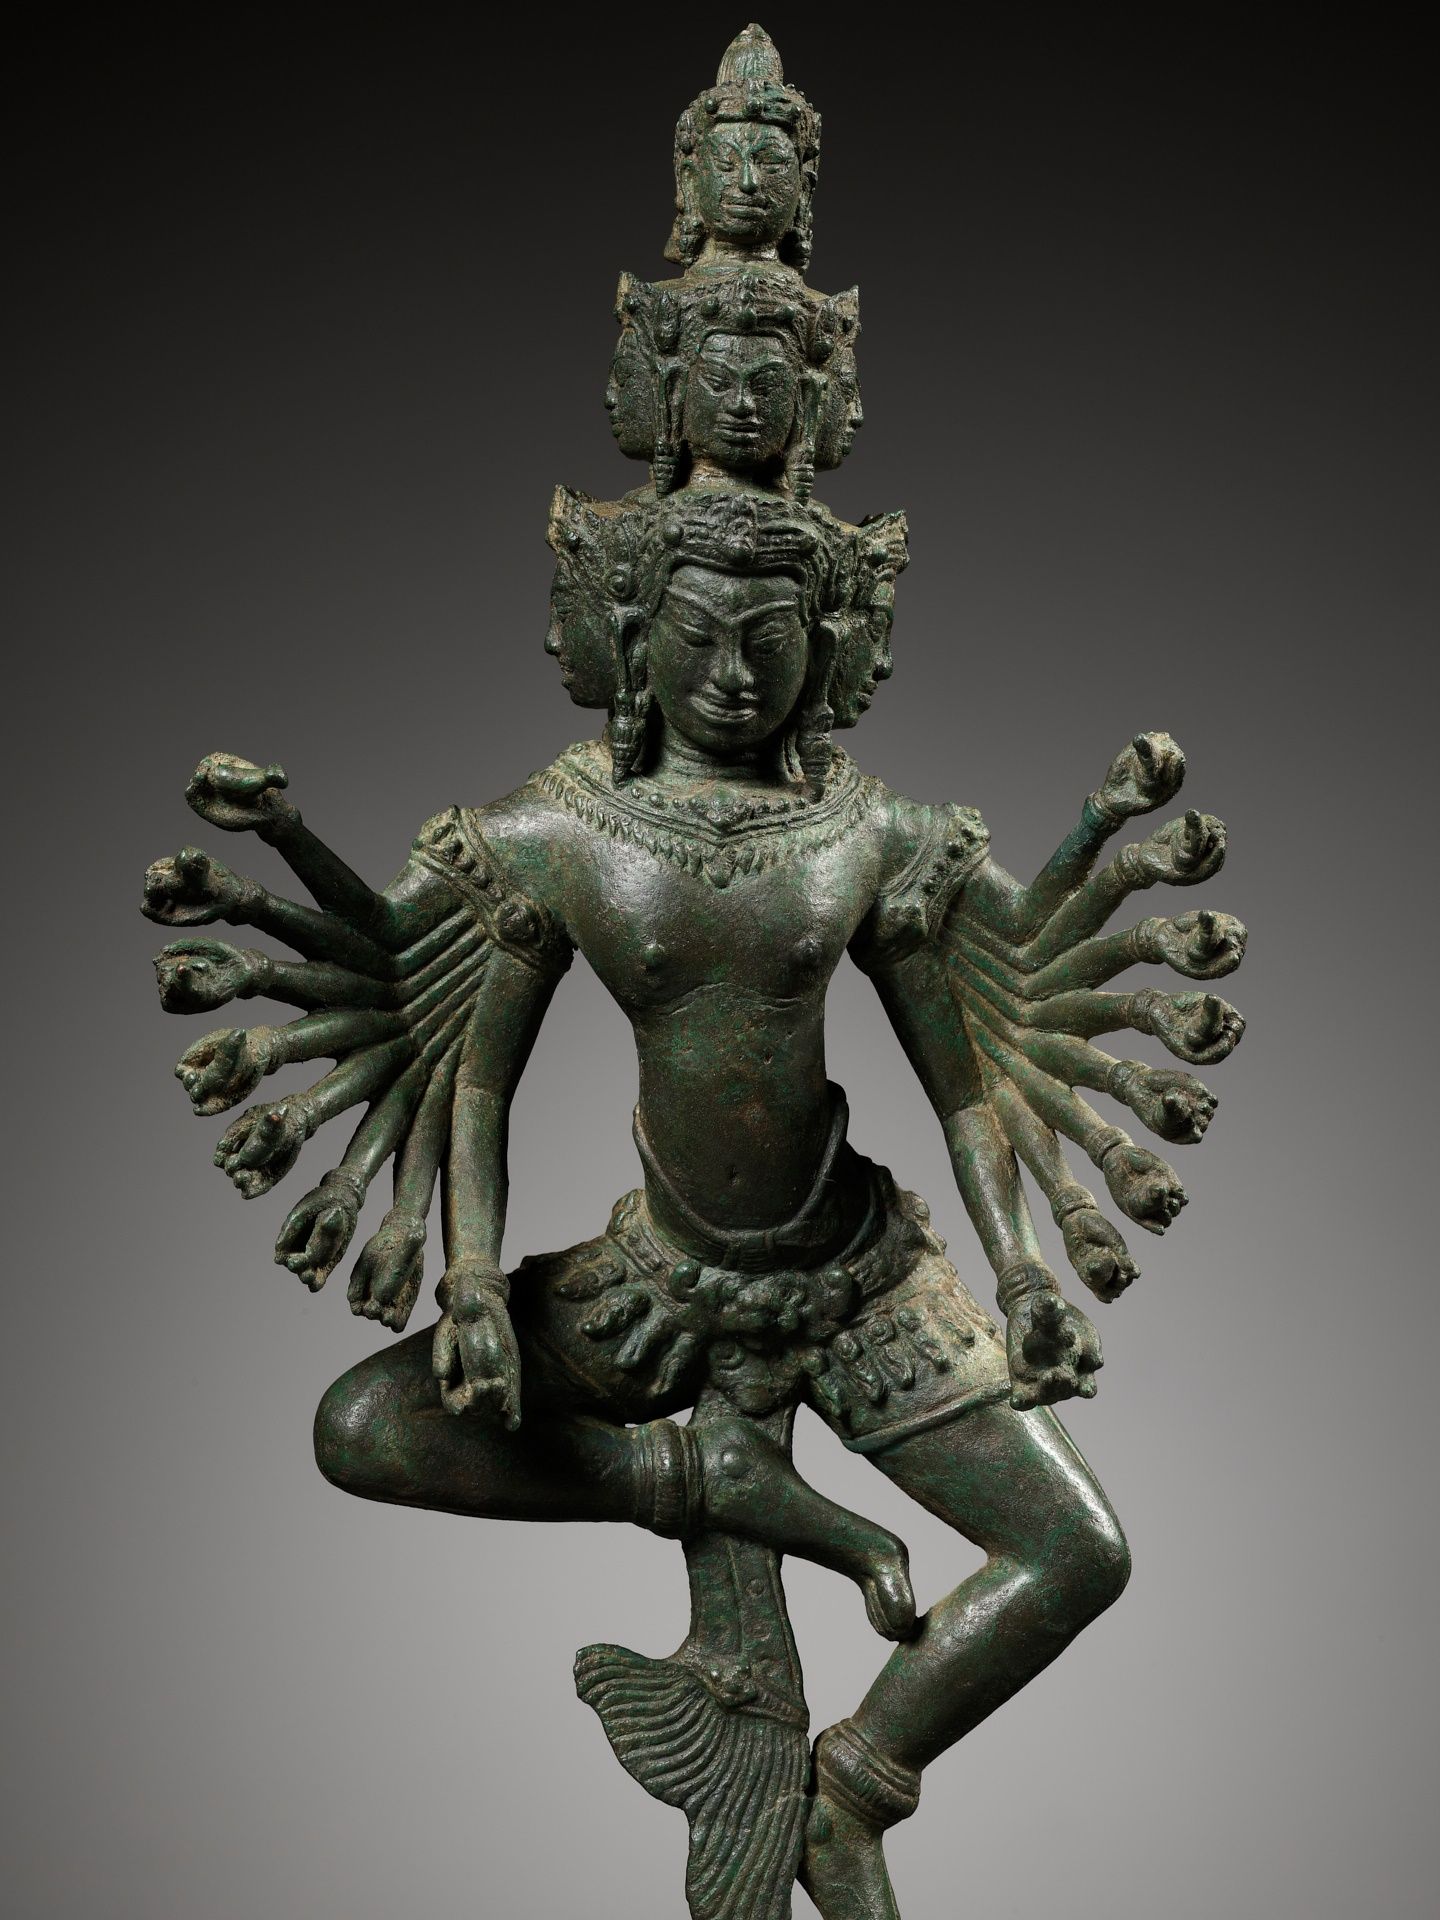 A BRONZE FIGURE OF A DANCING HEVAJRA, ANGKOR PERIOD, BAYON STYLE